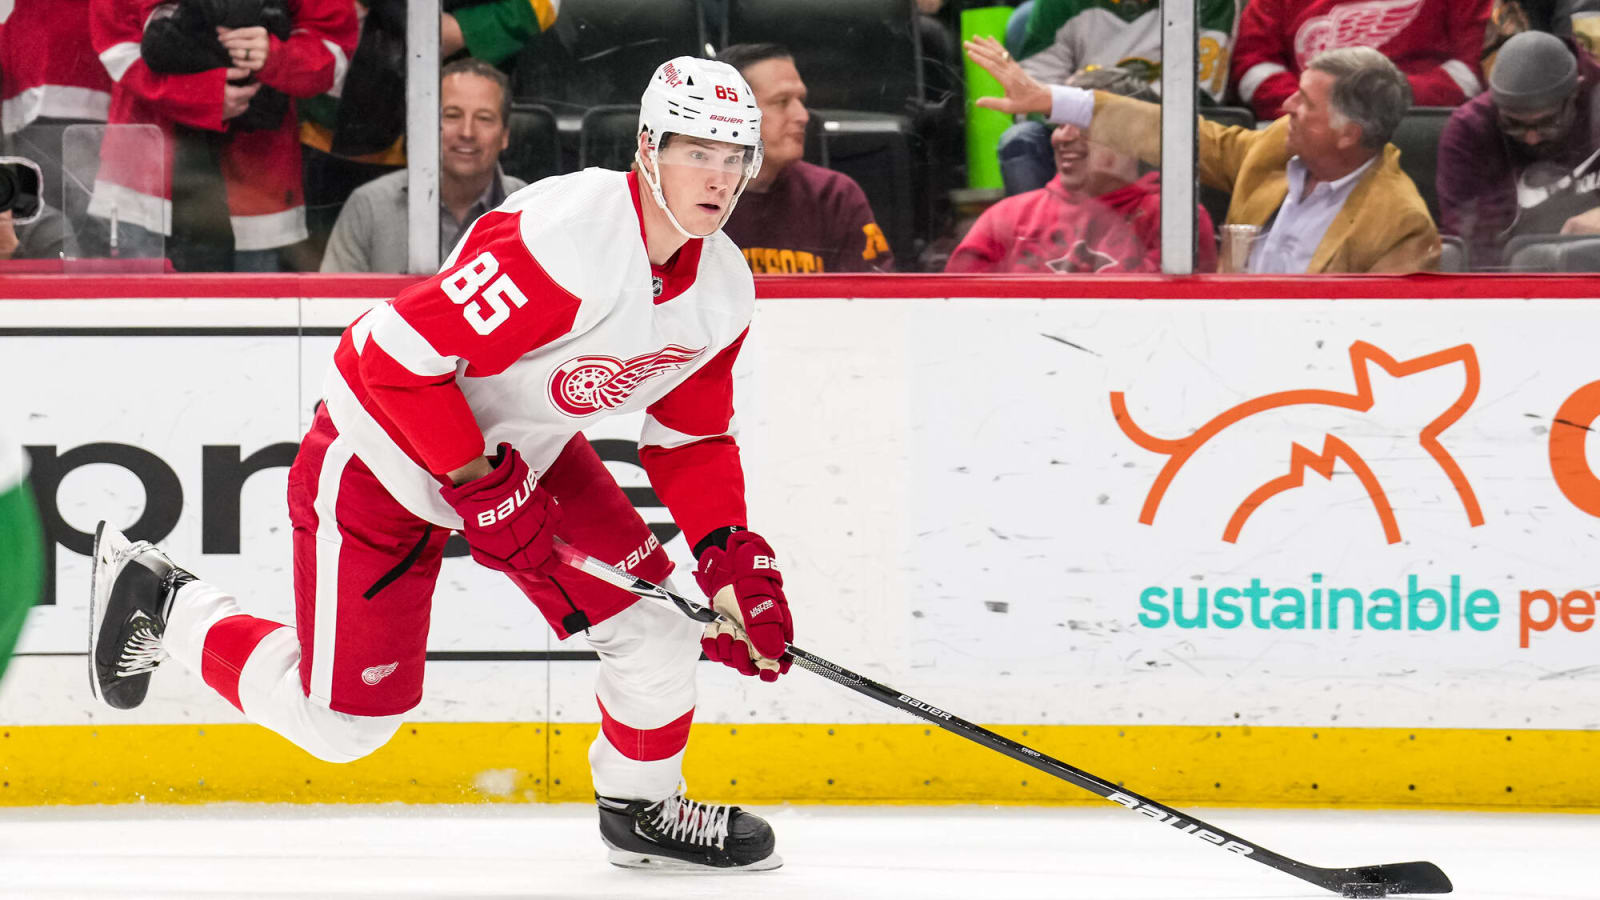 How Soderblom Can Make The Red Wings This Fall